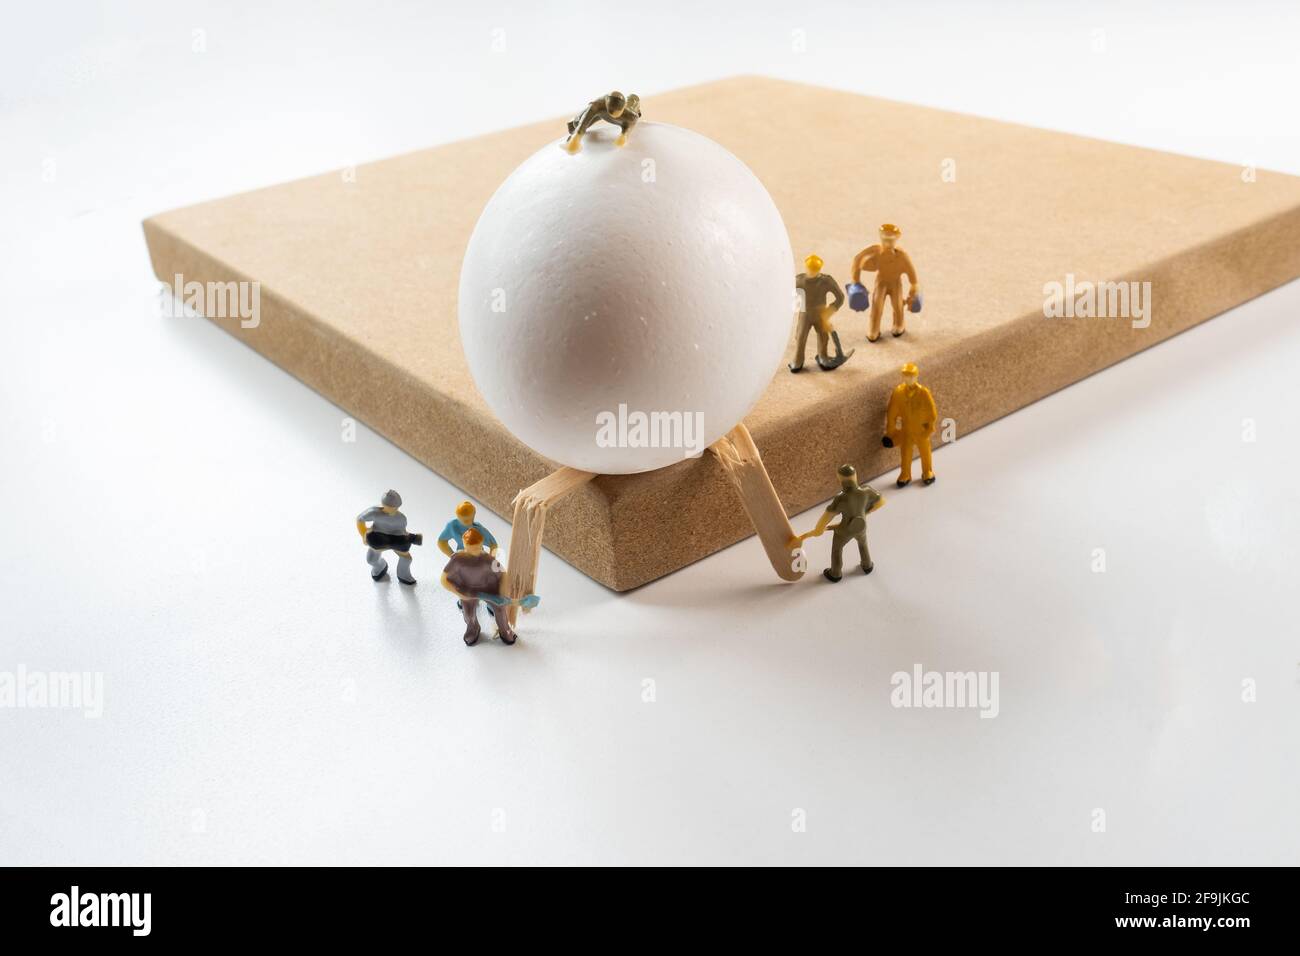 The Egg going to fall down and figure workers trying to stop it,  emergency situation, disaster recovery, team work concept Stock Photo